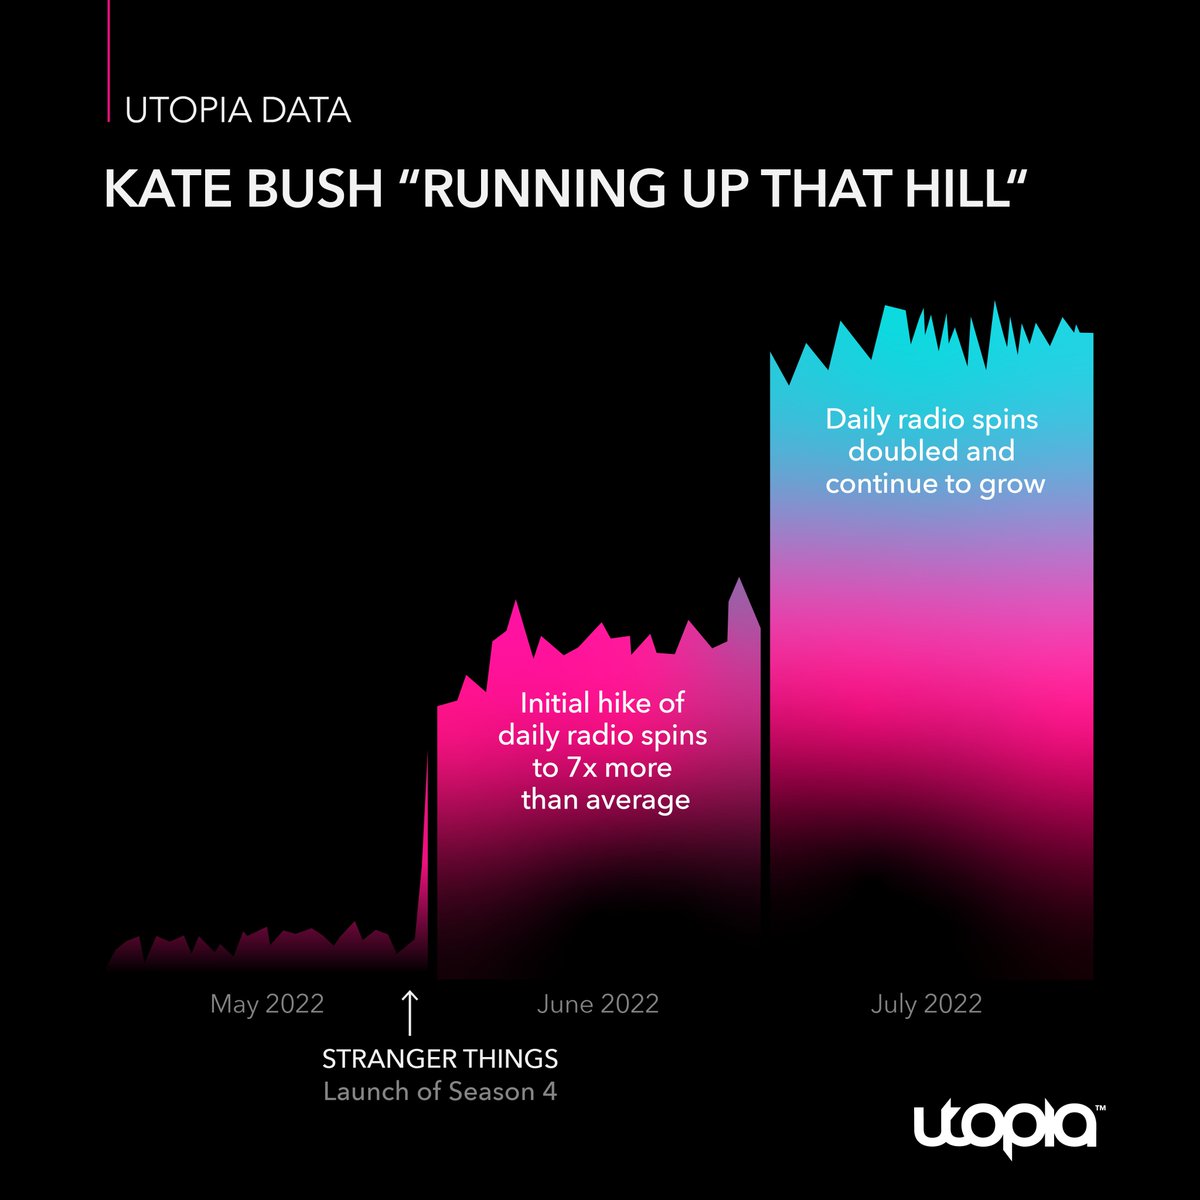 After 30 years of a pretty quiet career, Stranger Things bolted Kate Bush back into the limelight. With one key episode, Running Up that Hill became the anthem of a new generation.

utopiamusic.com/blog/utopia-da…

#KateBush #RunningUpThatHill #SyncLicensing #UtopiaMusic #MusicAnalytics